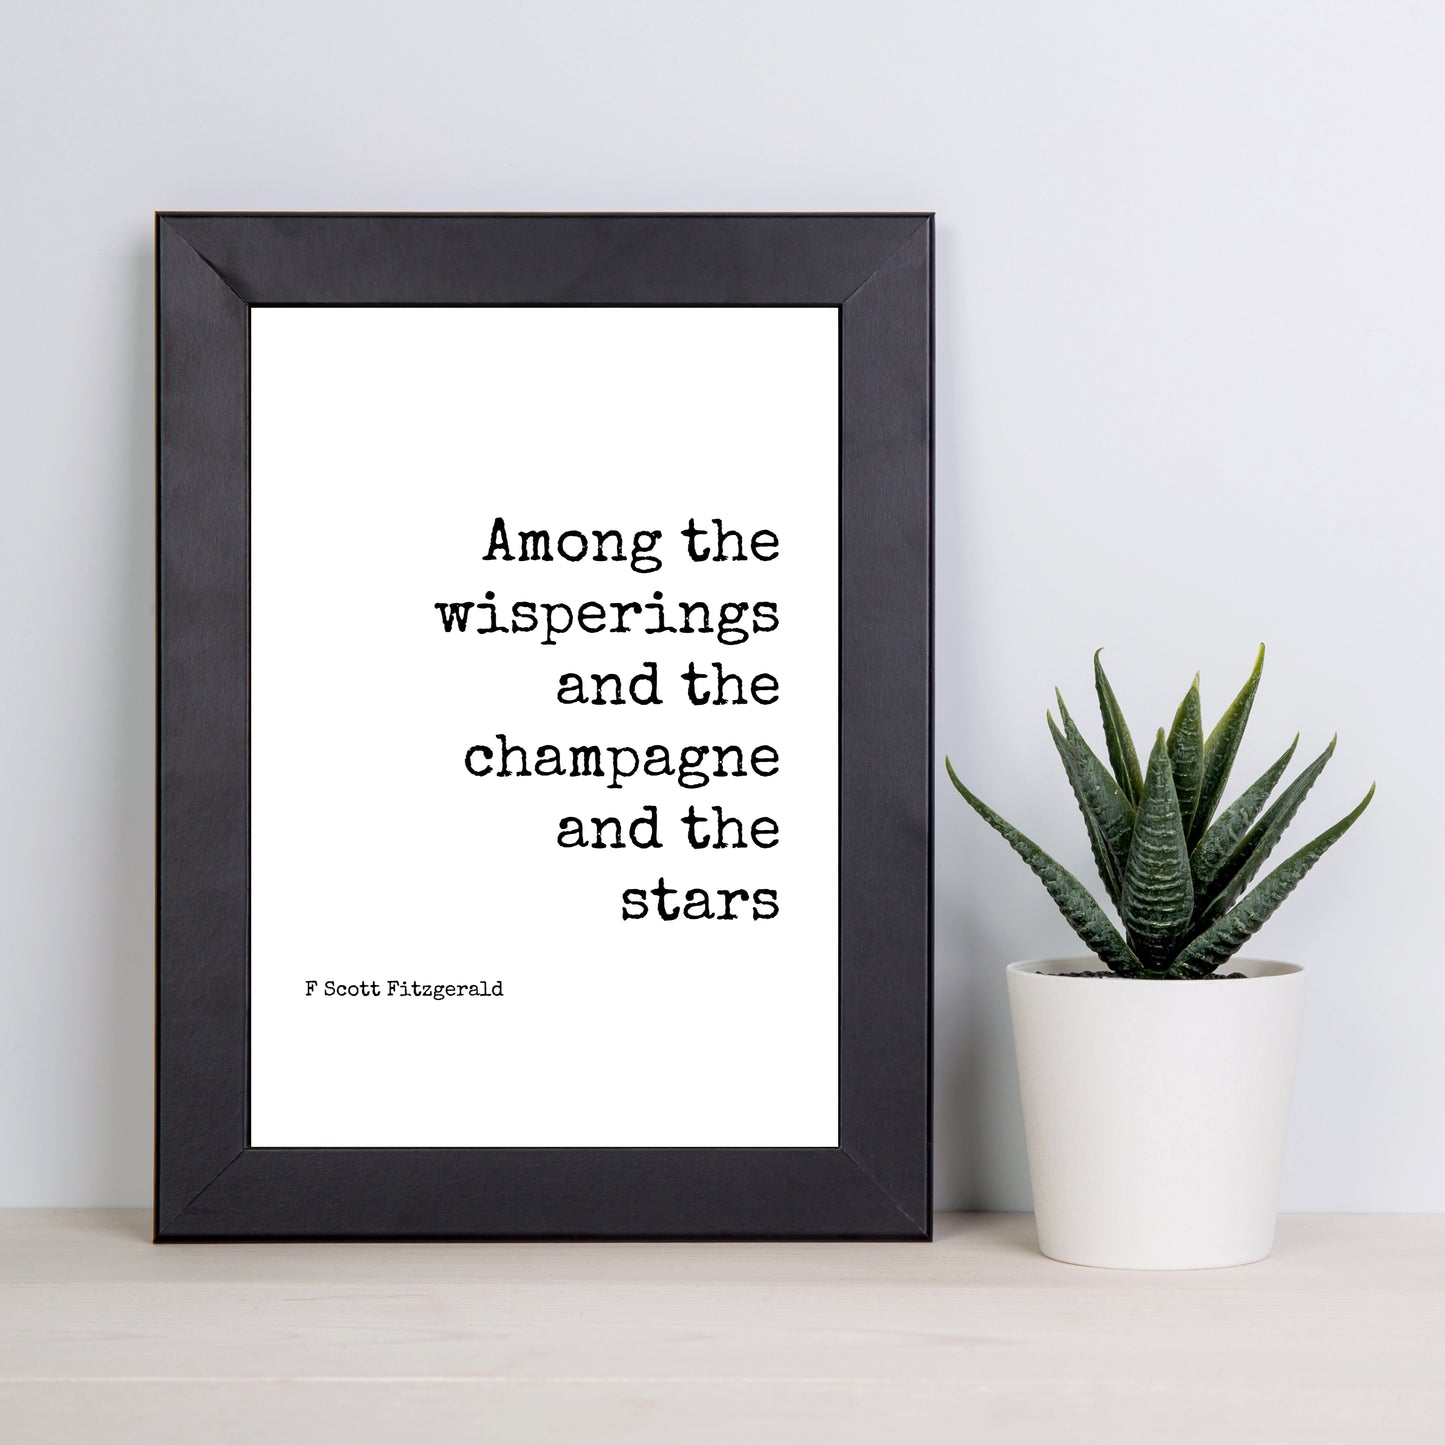 "Among The Wisperings And The Champagne And The Stars" Famous Quote By F. Scott Fitzgerald In Typewriter Print, Printable Art